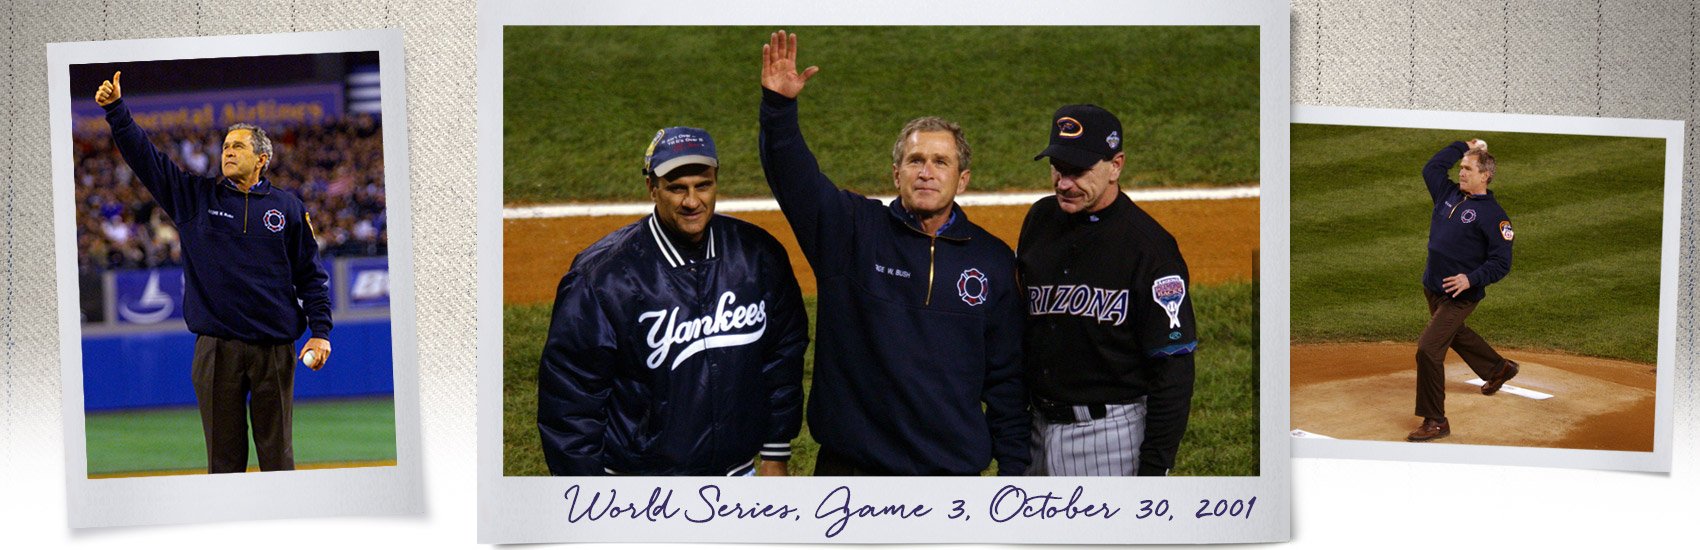 Remembering President Bush's First Pitch at Yankee Stadium After 9/11 